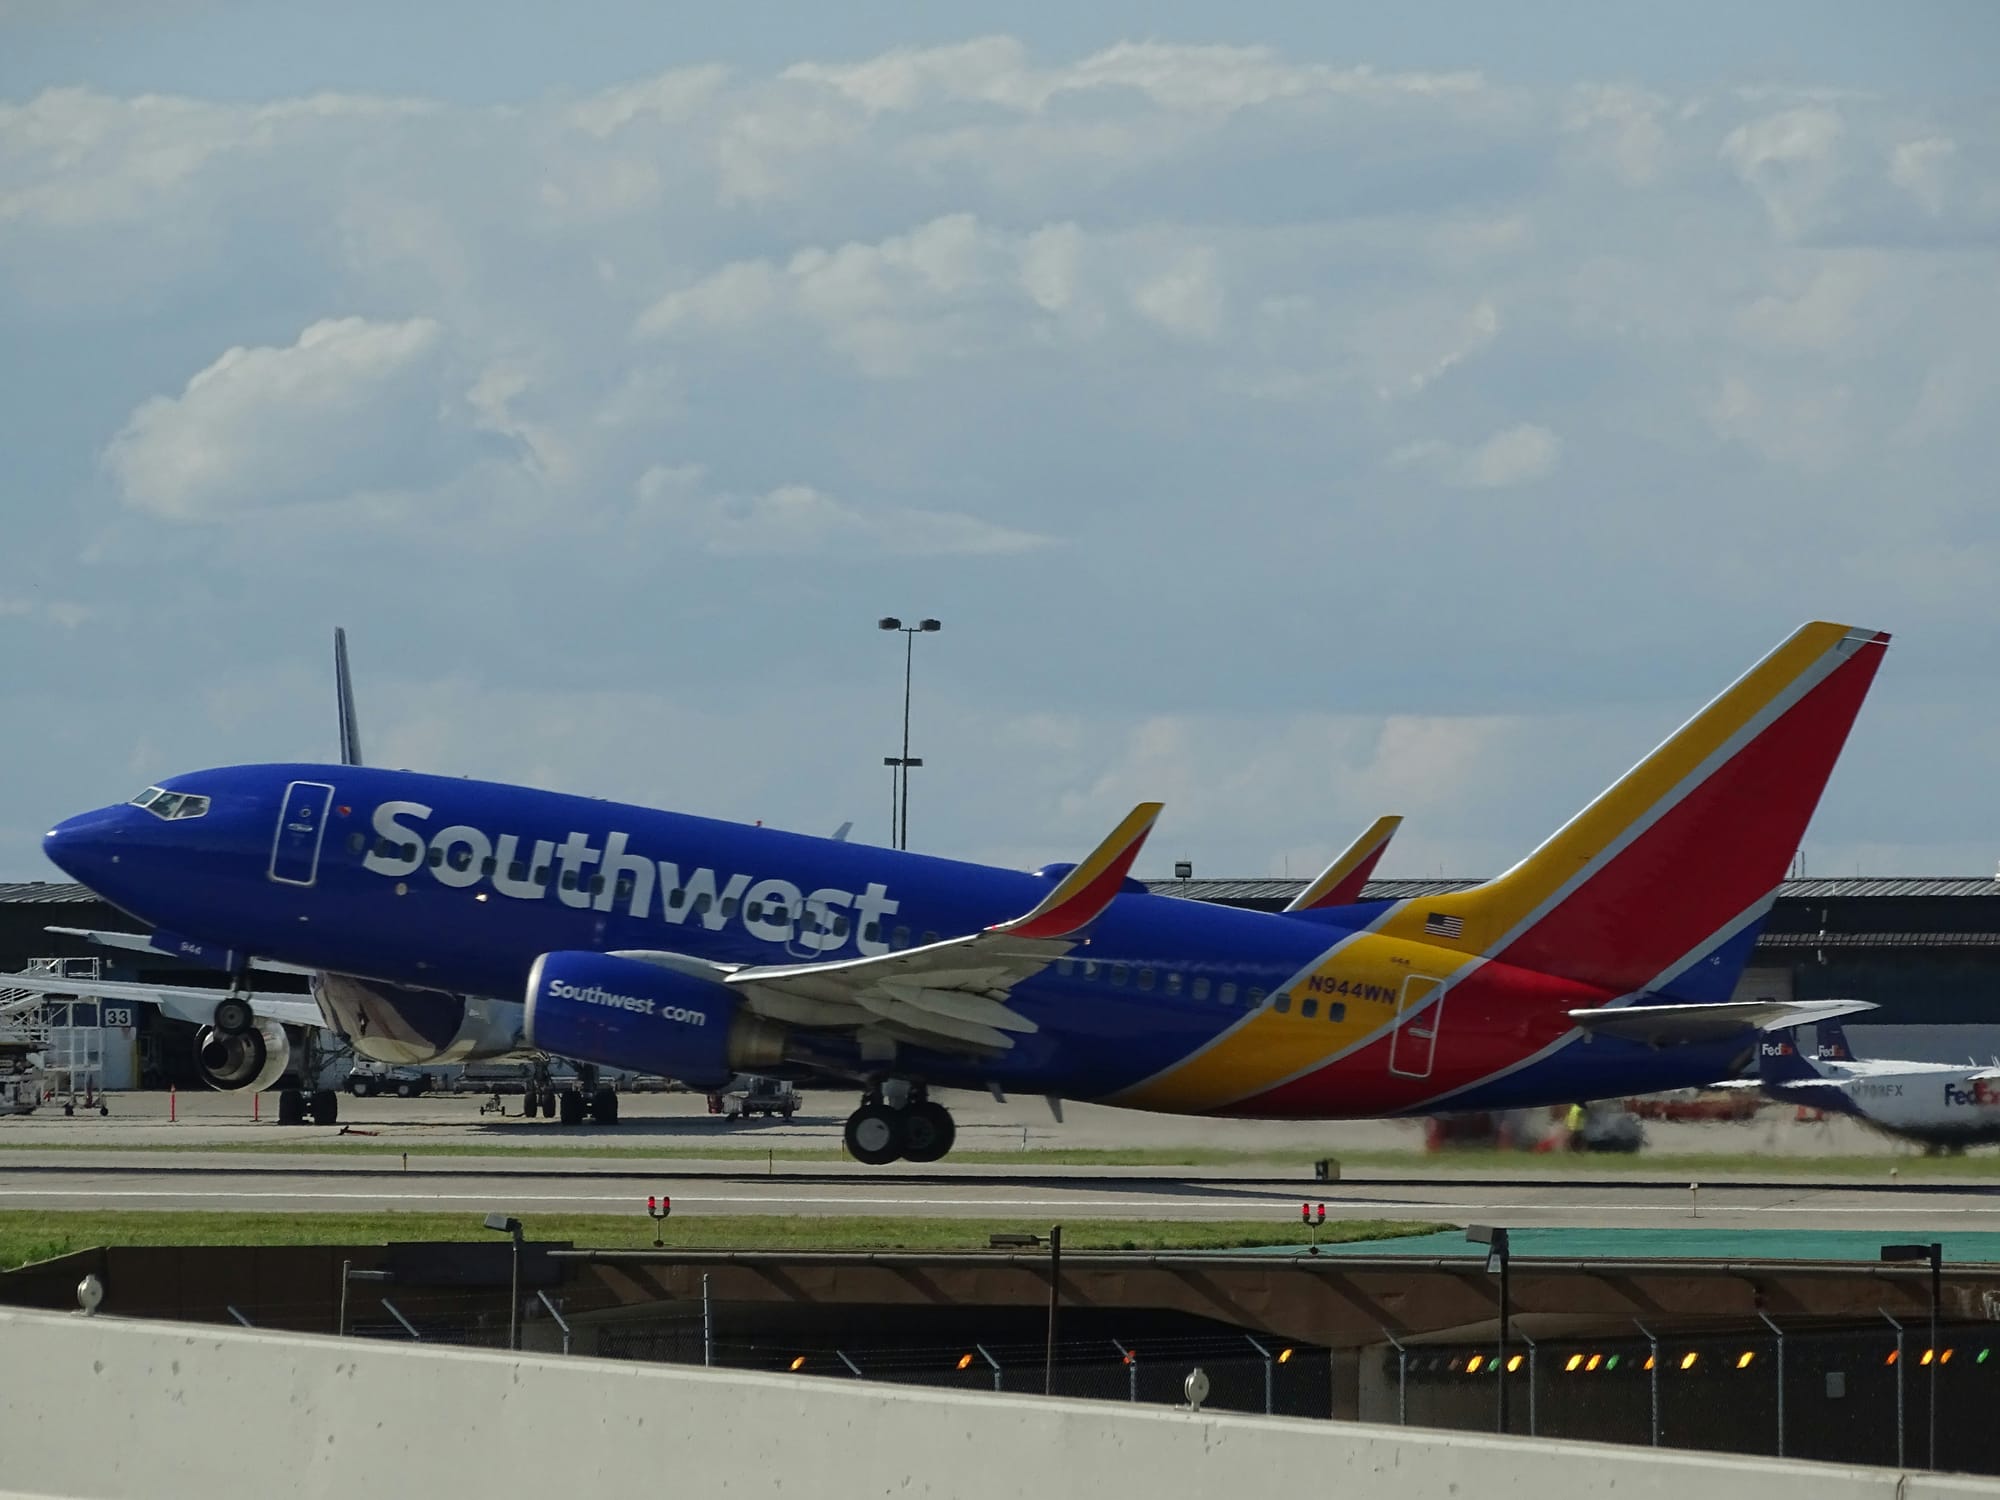 Why I Don't Like the Southwest Airlines Boarding Process